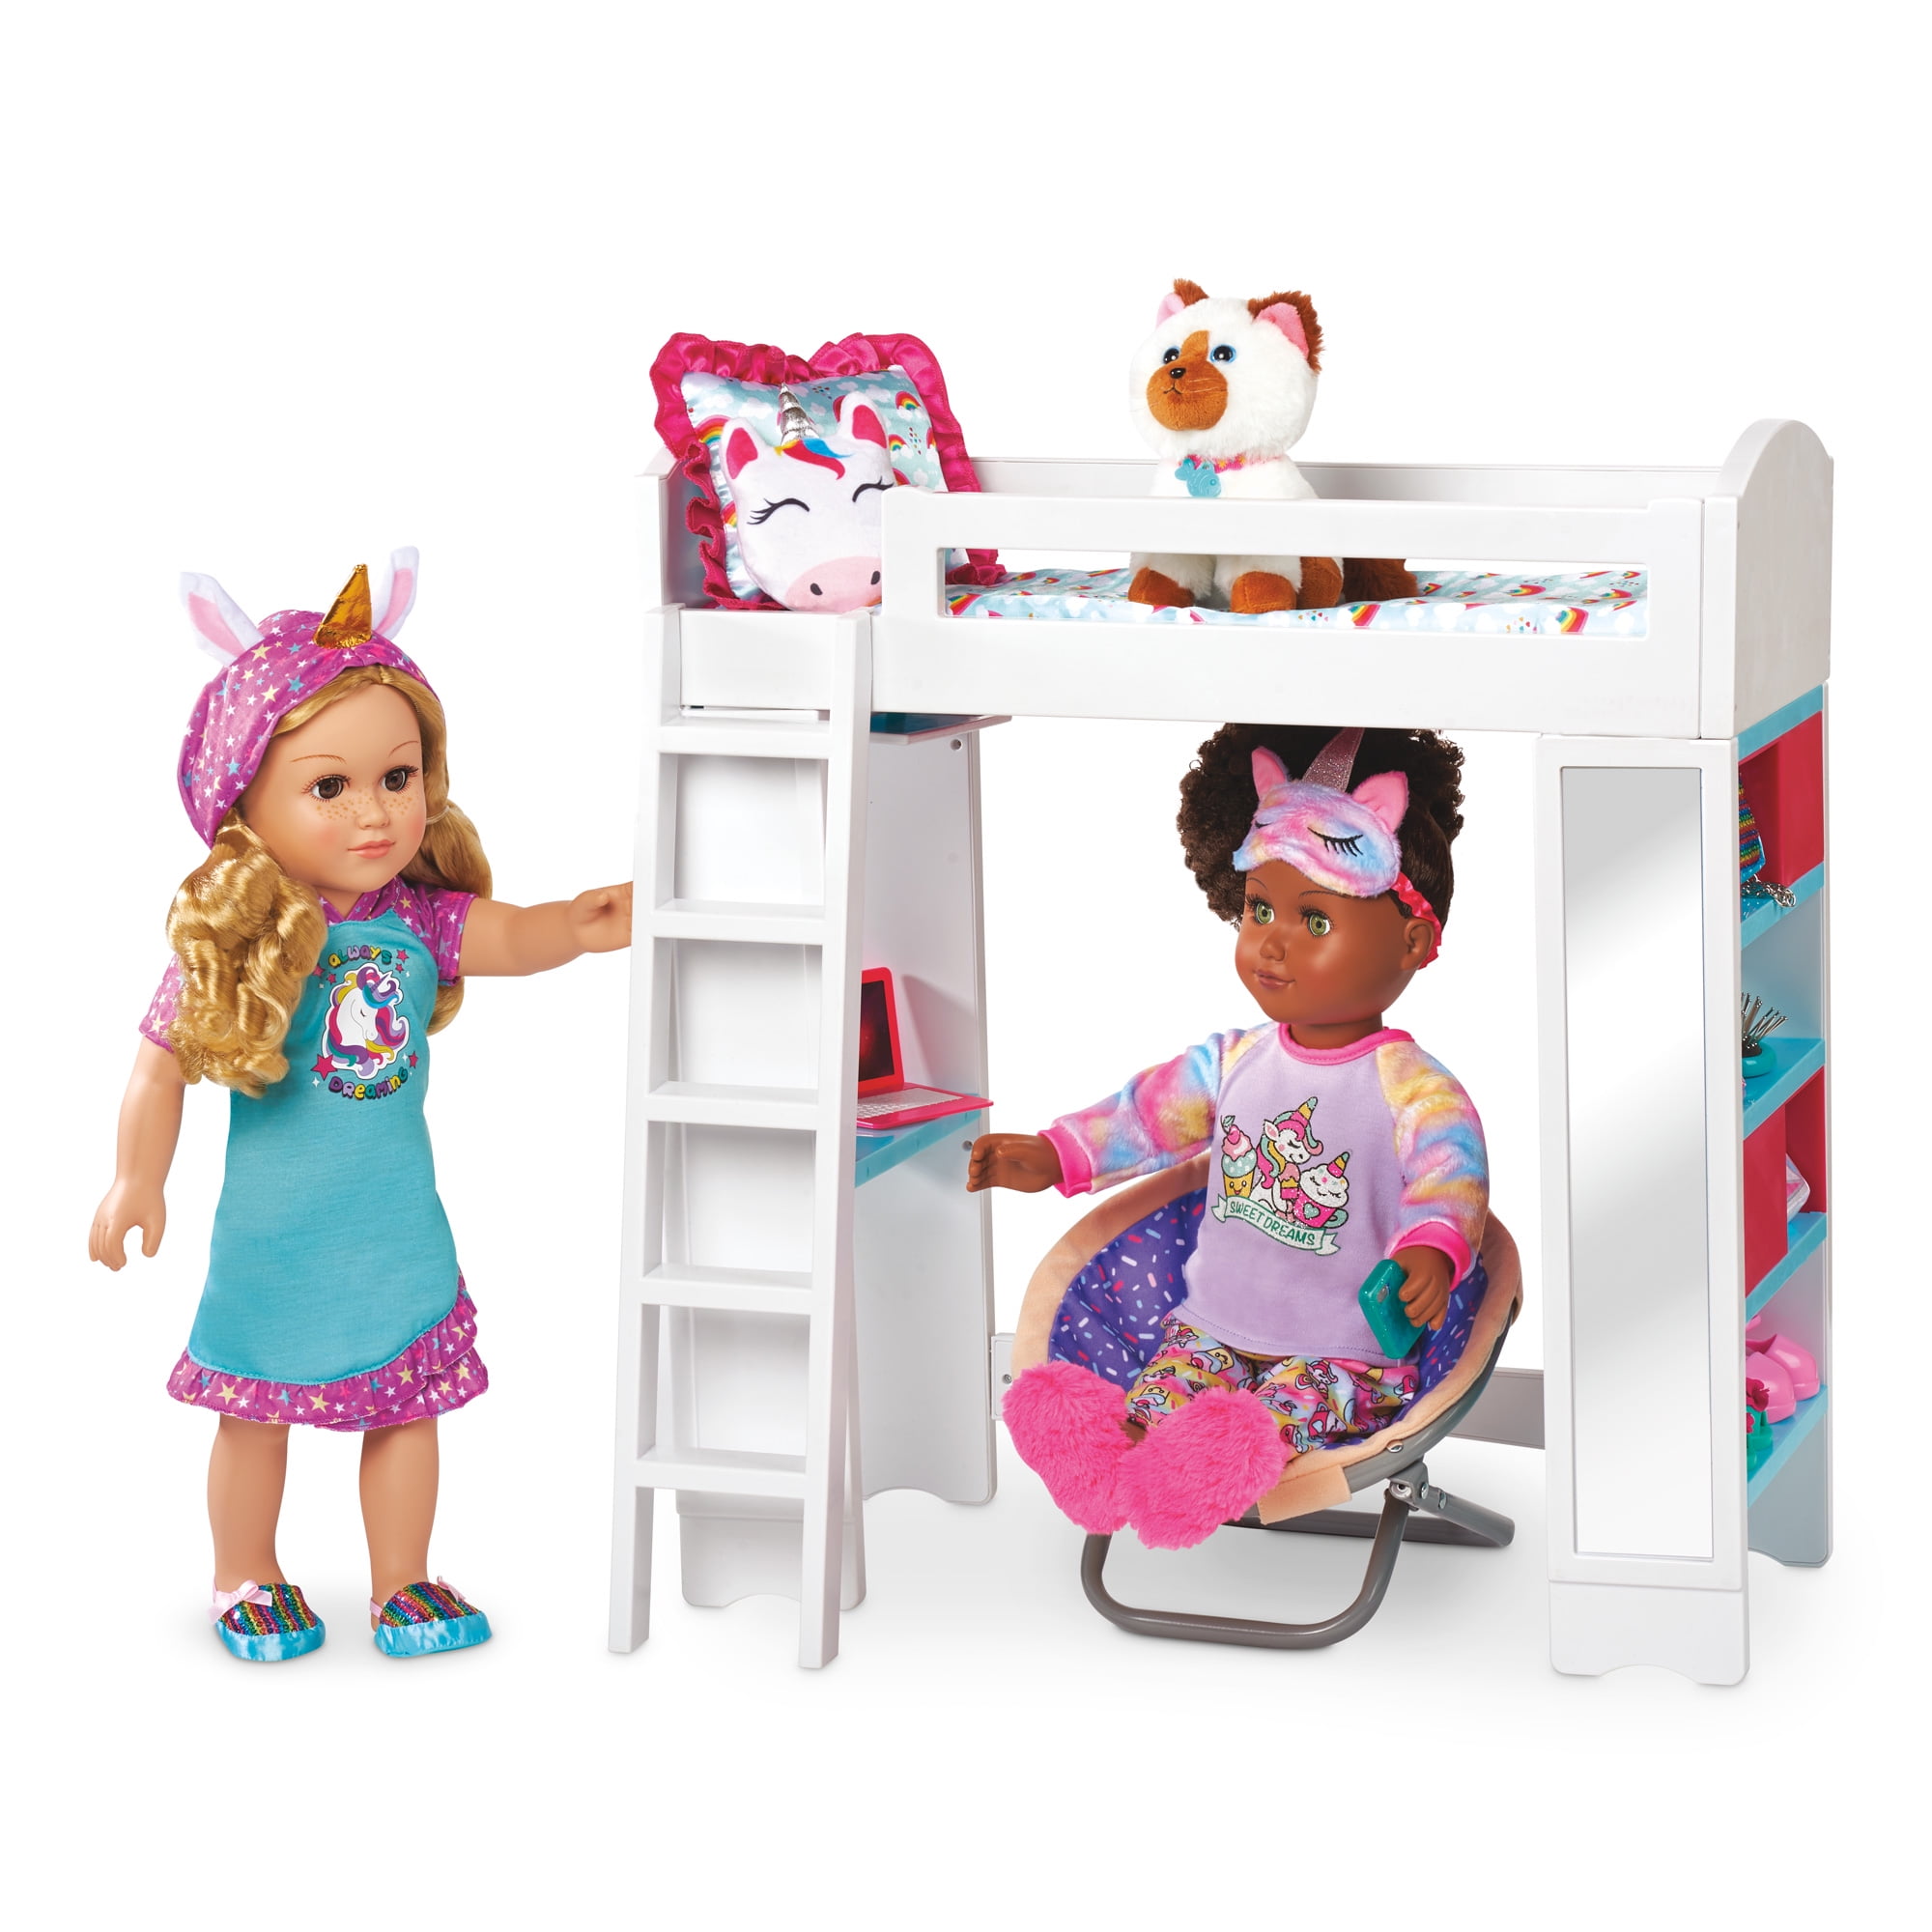 As Loft Bed Play Set For 18 Dolls, 18 Doll Bunk Bed Kit